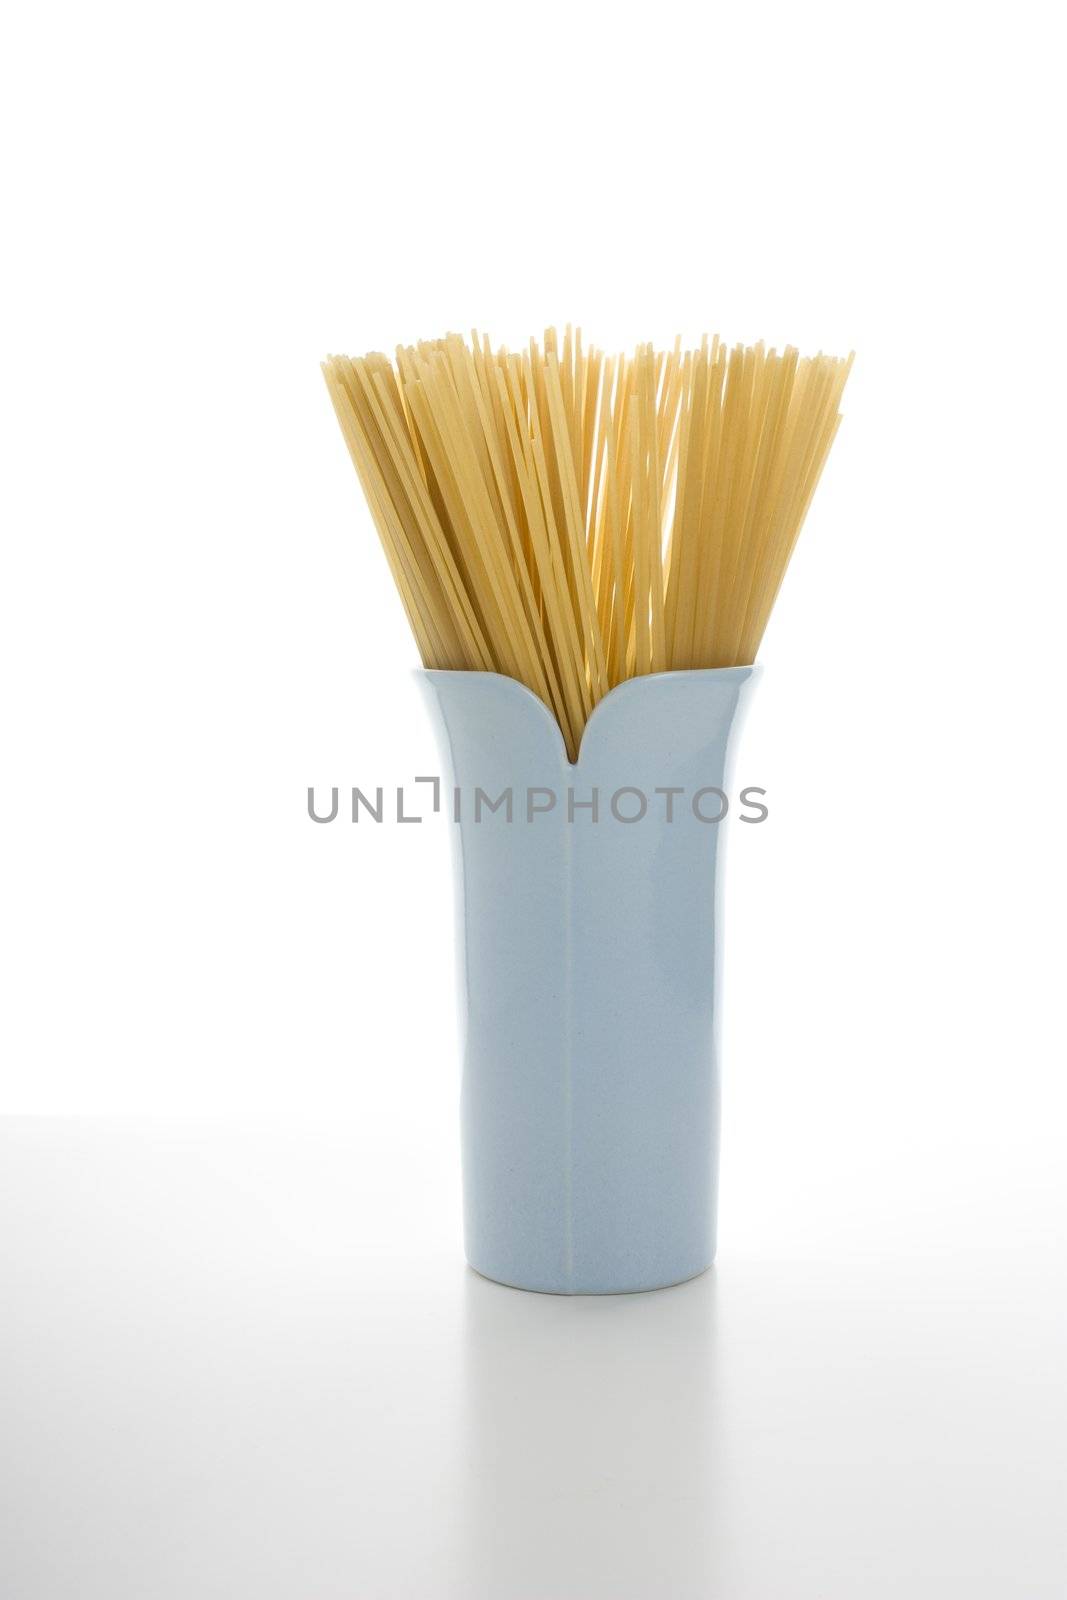 Spaghetti in blue vase with white background